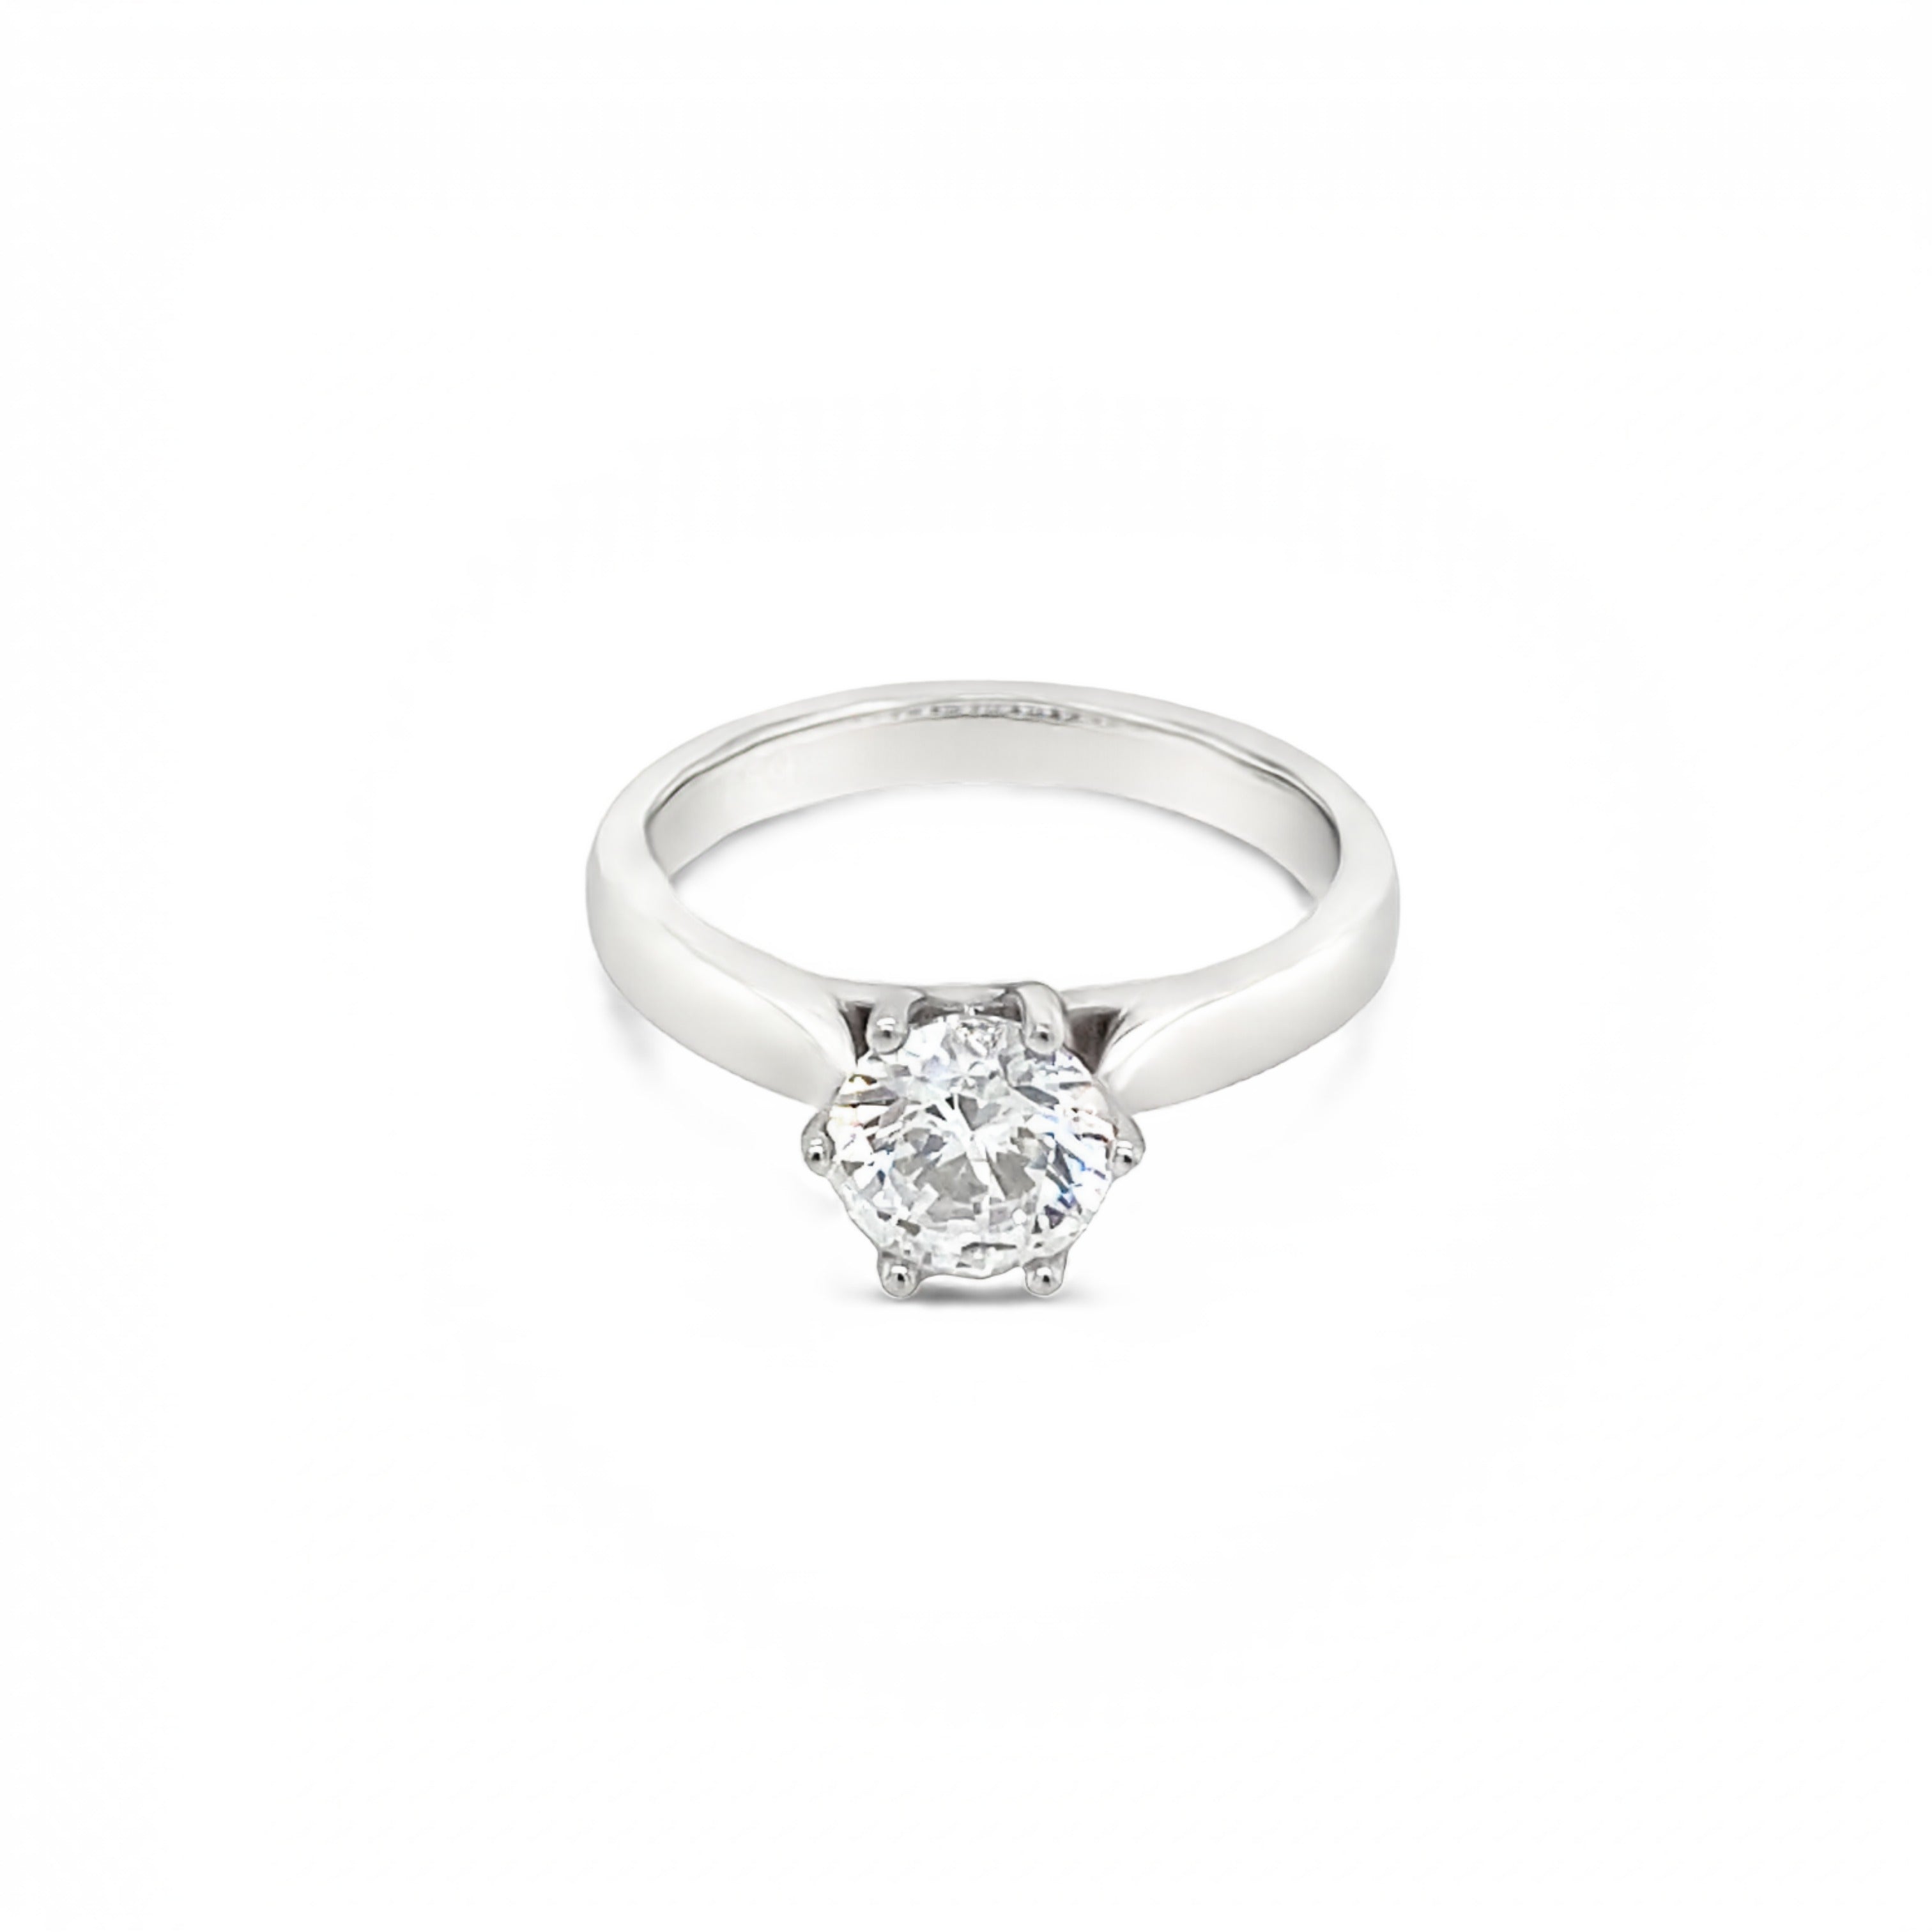 18ct White Gold Six Claw 1ct Round Brilliant Cut Diamond Solitaire Ring